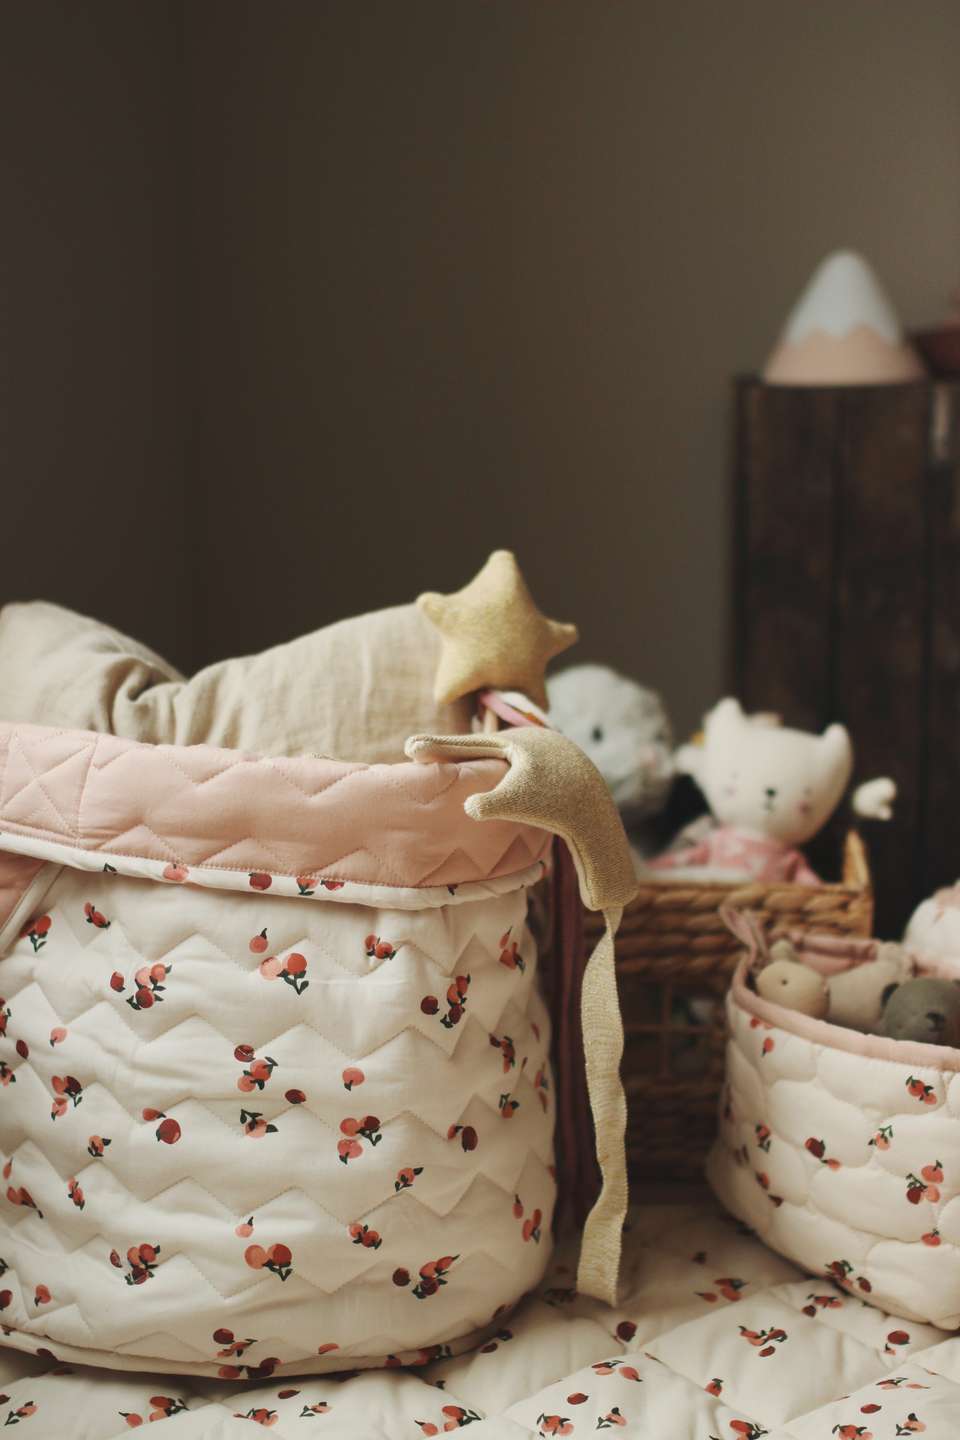 Large Quilted Storage Basket - Peaches image